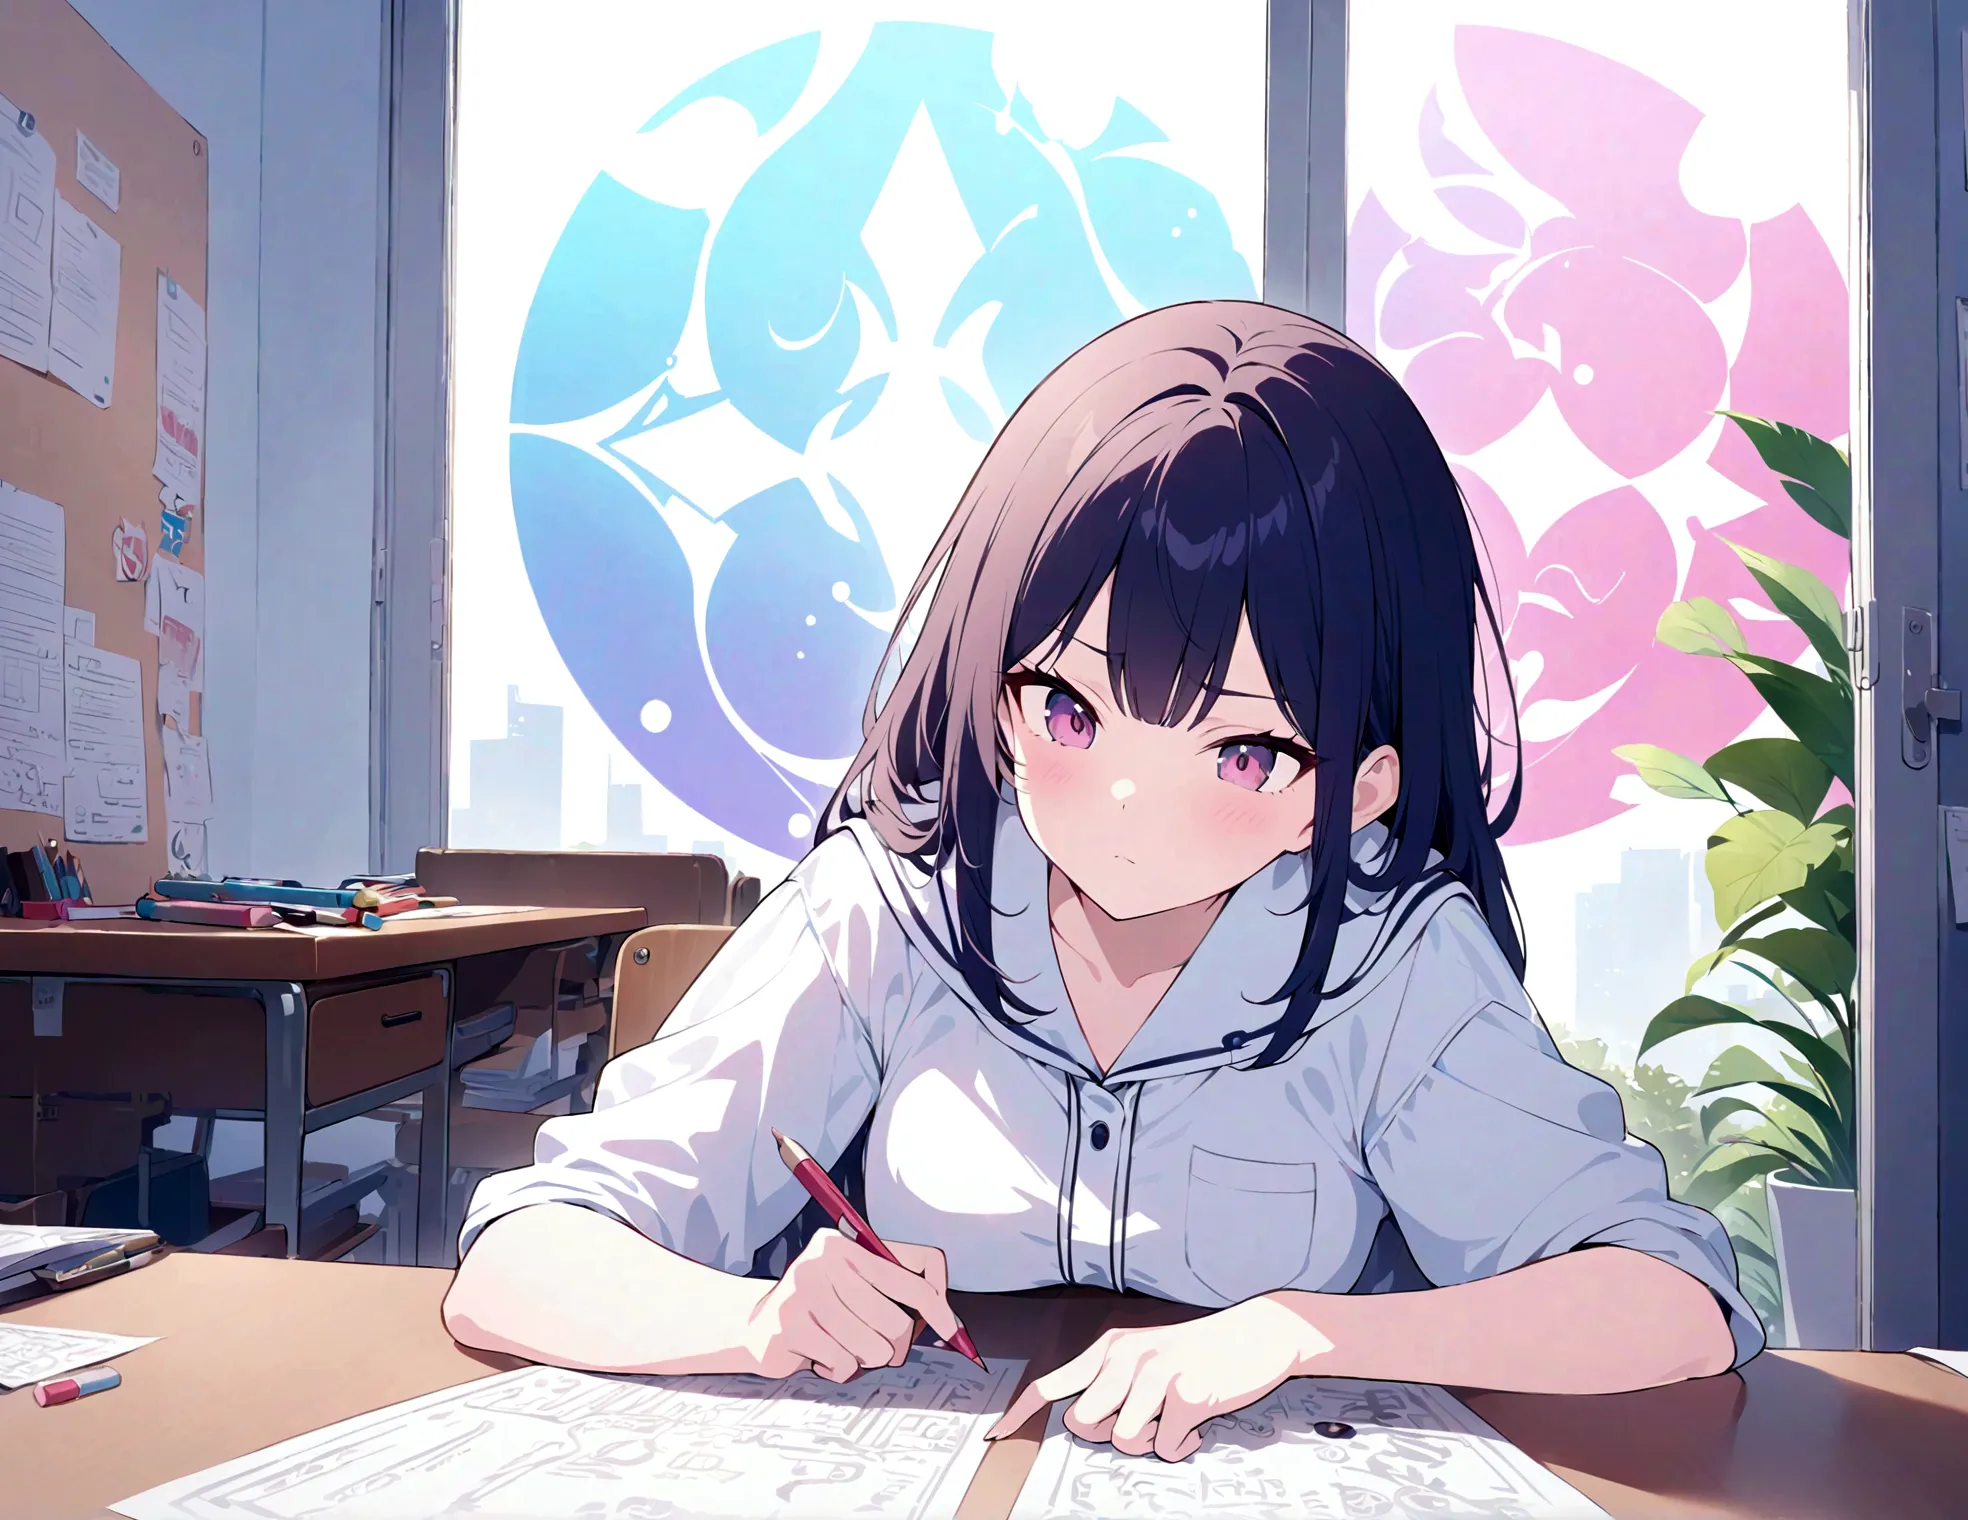 One 17-year-old female taking a paper test,focus on girls,She is a quiet and smart-looking cute girl.,A woman is sitting in a ch...